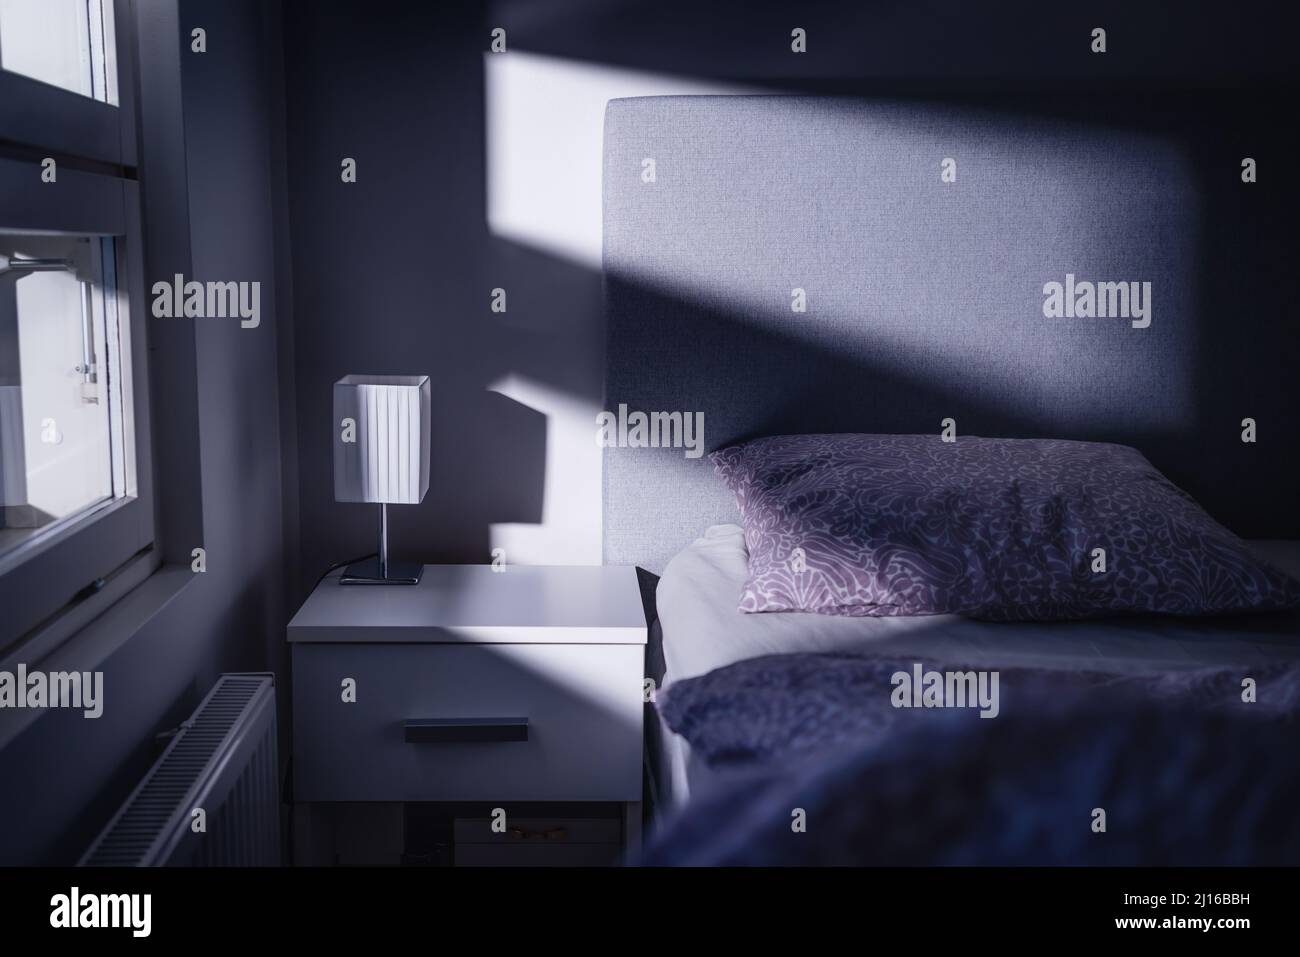 Bed at night in dark bedroom. Blue light and moonlight from window. Pillow, sheet and duvet ready for sleeping. Bedside table and nightstand. Stock Photo